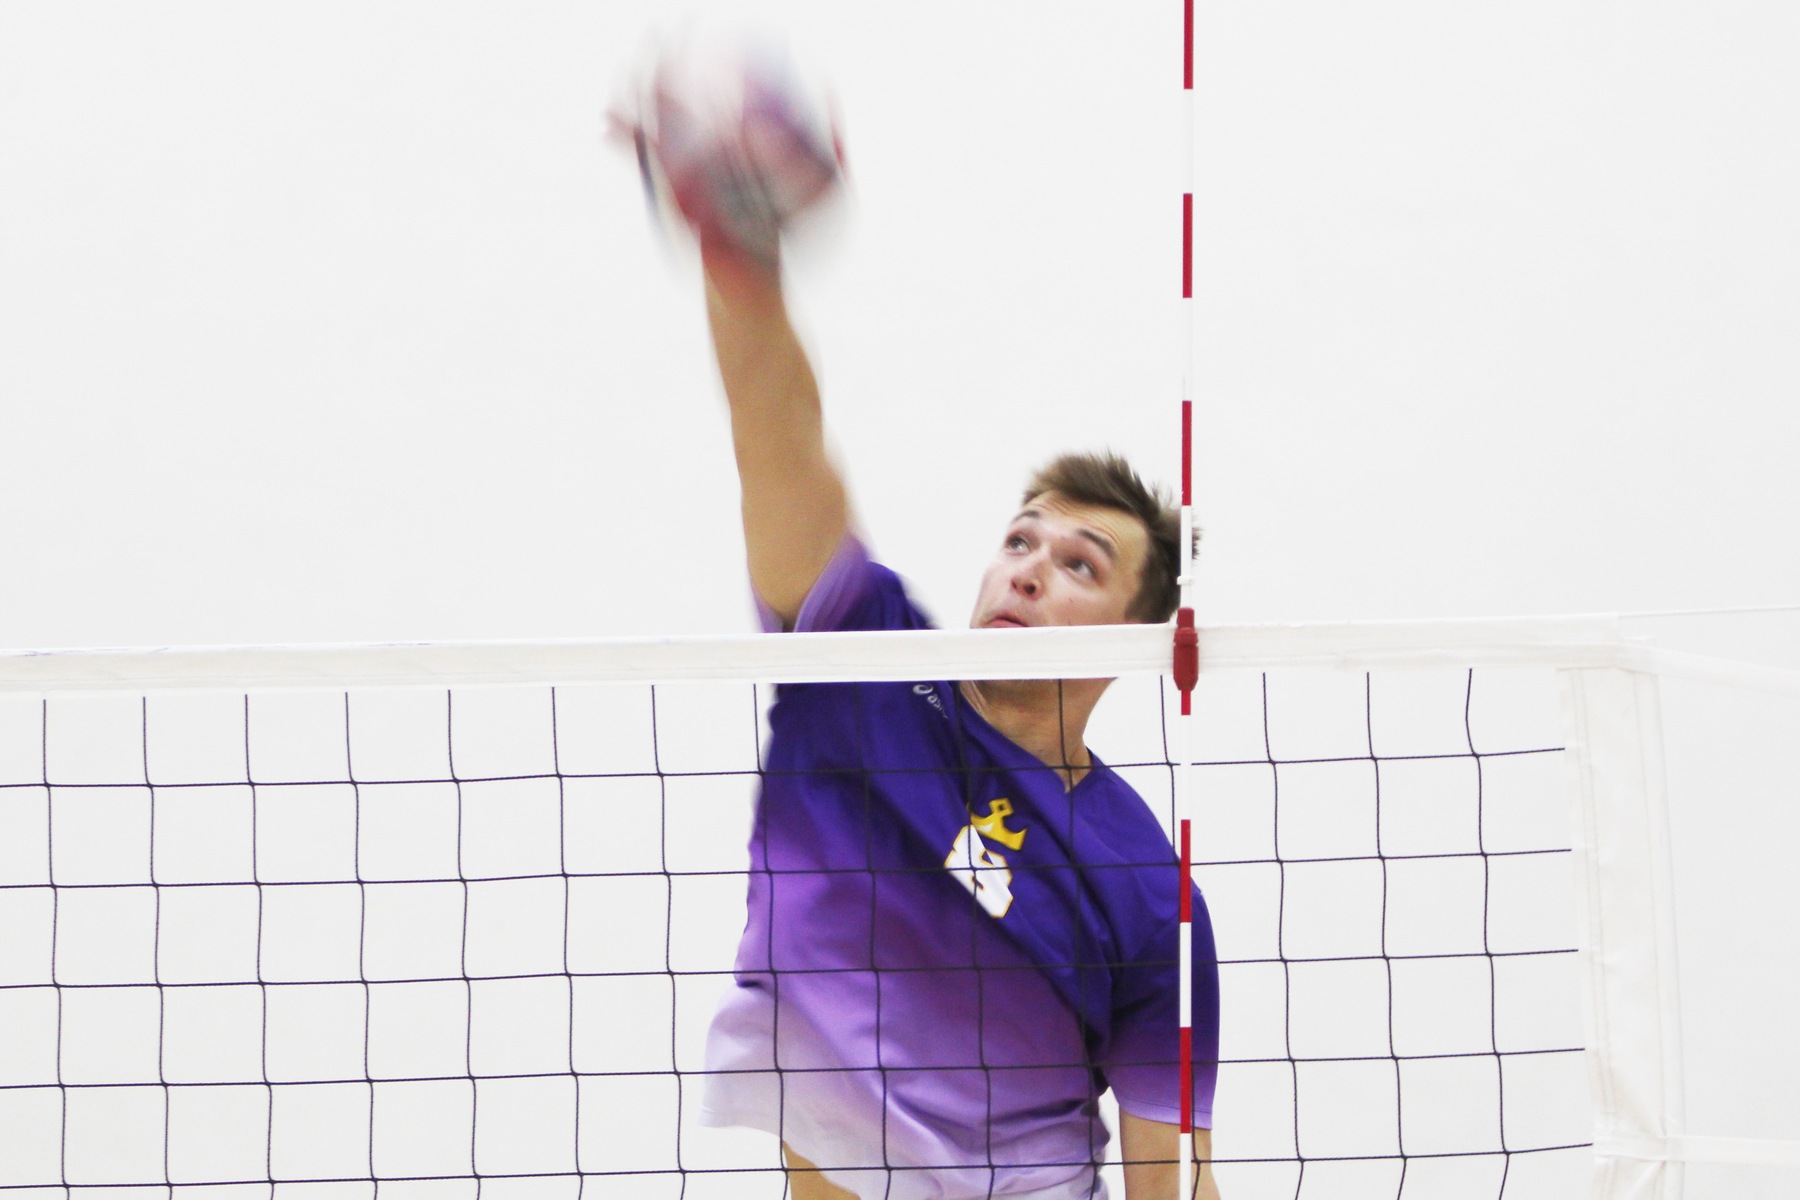 Patrick Rowe was one kill shy of his career-high and tallied 16 in a 3-1 win against Marymount.